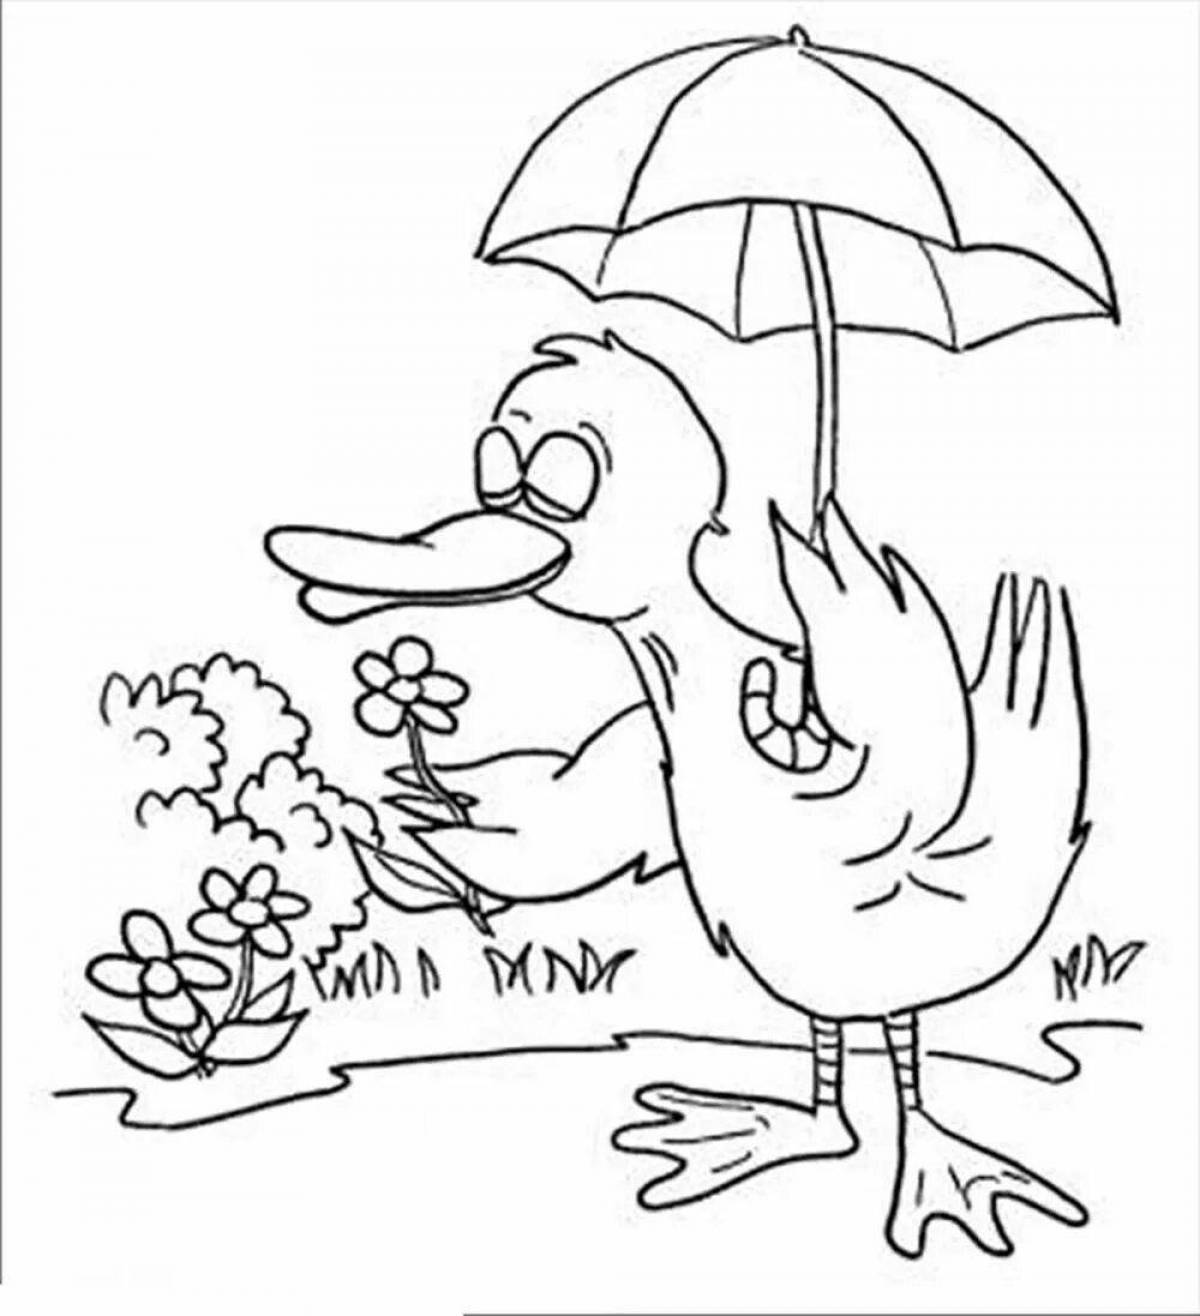 Fun coloring duck for girls